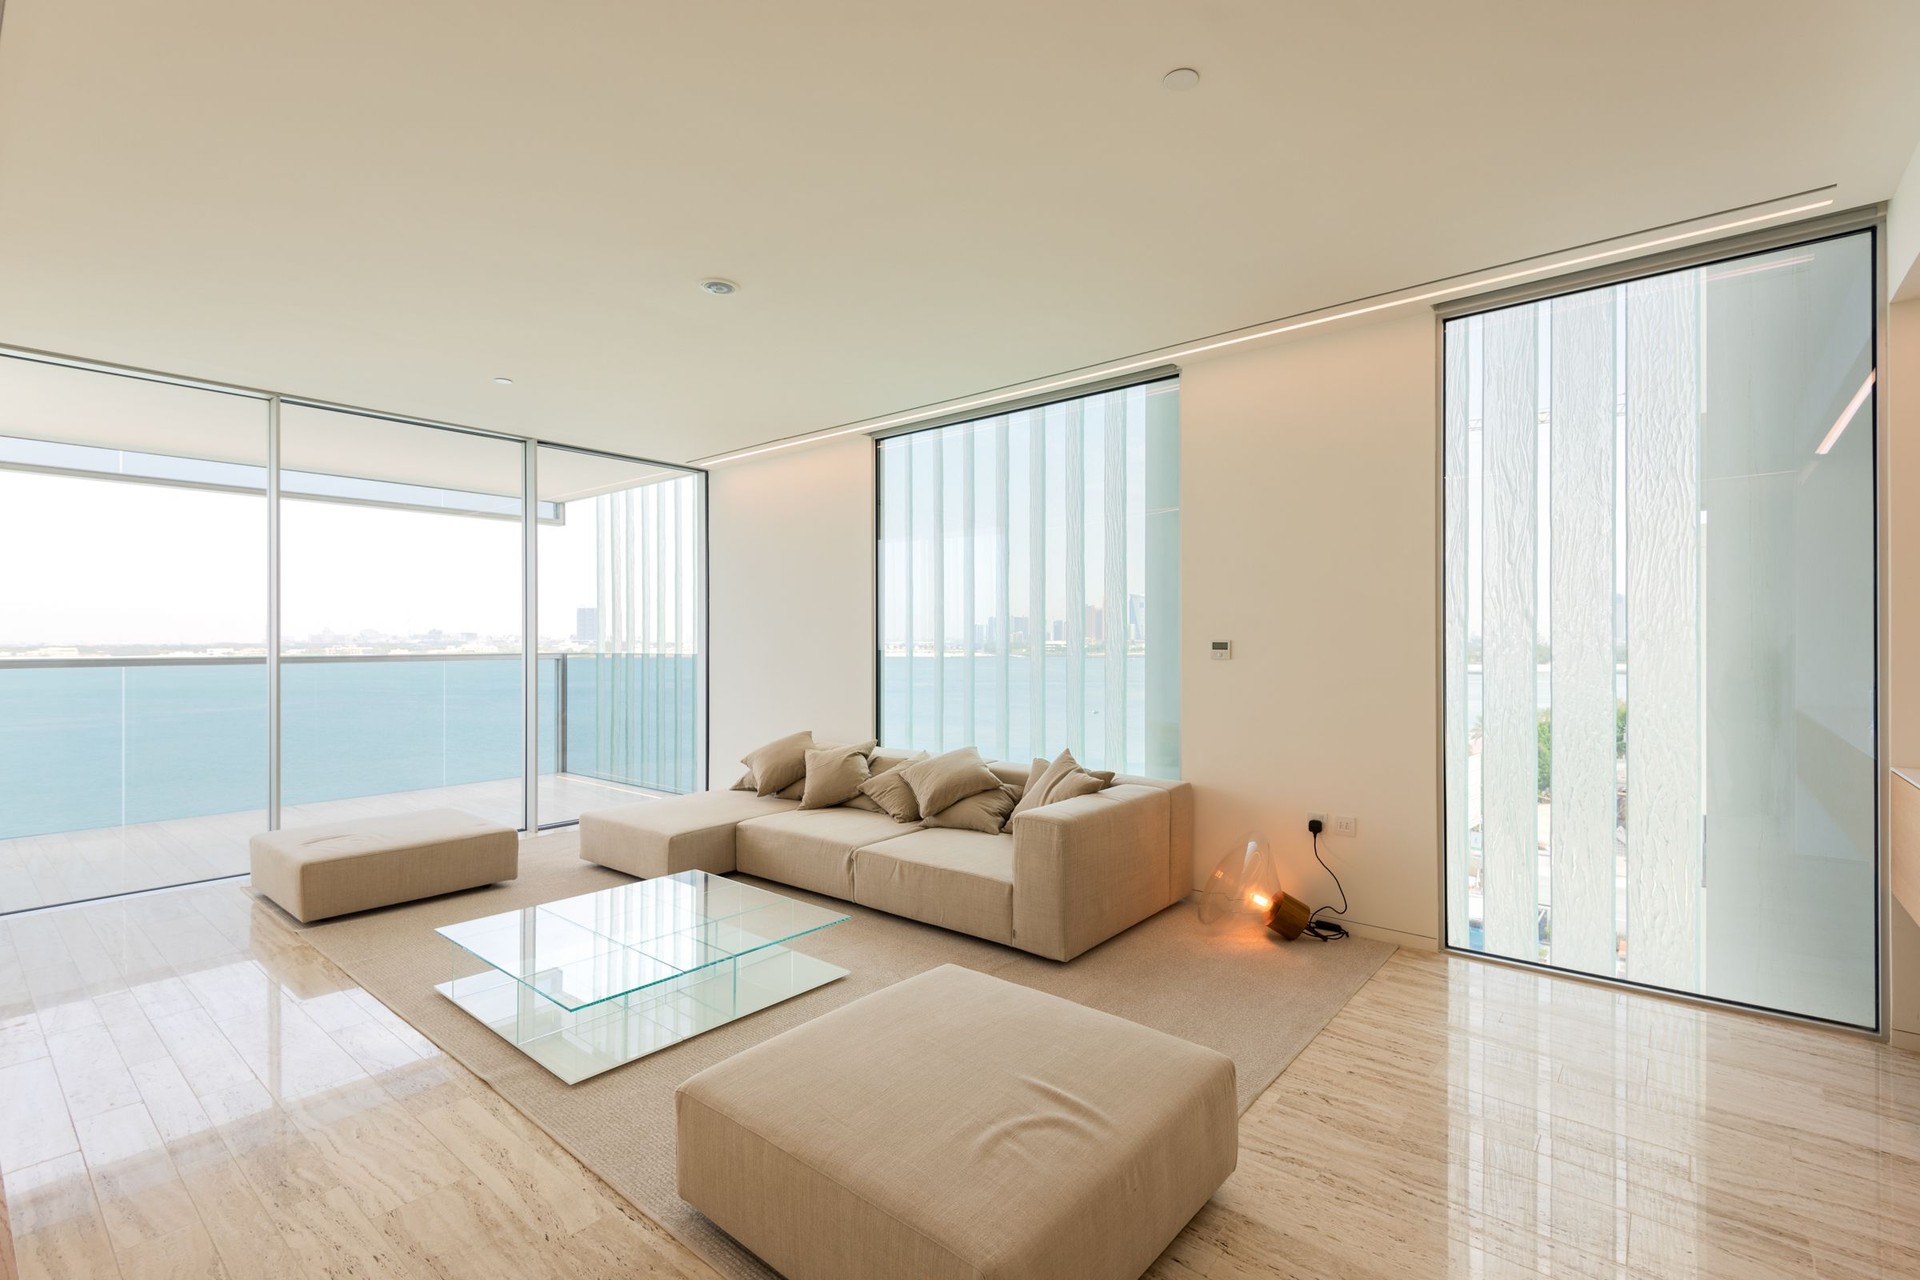 Stunning Sea View Apartment on Palm Jumeirah: Image 1